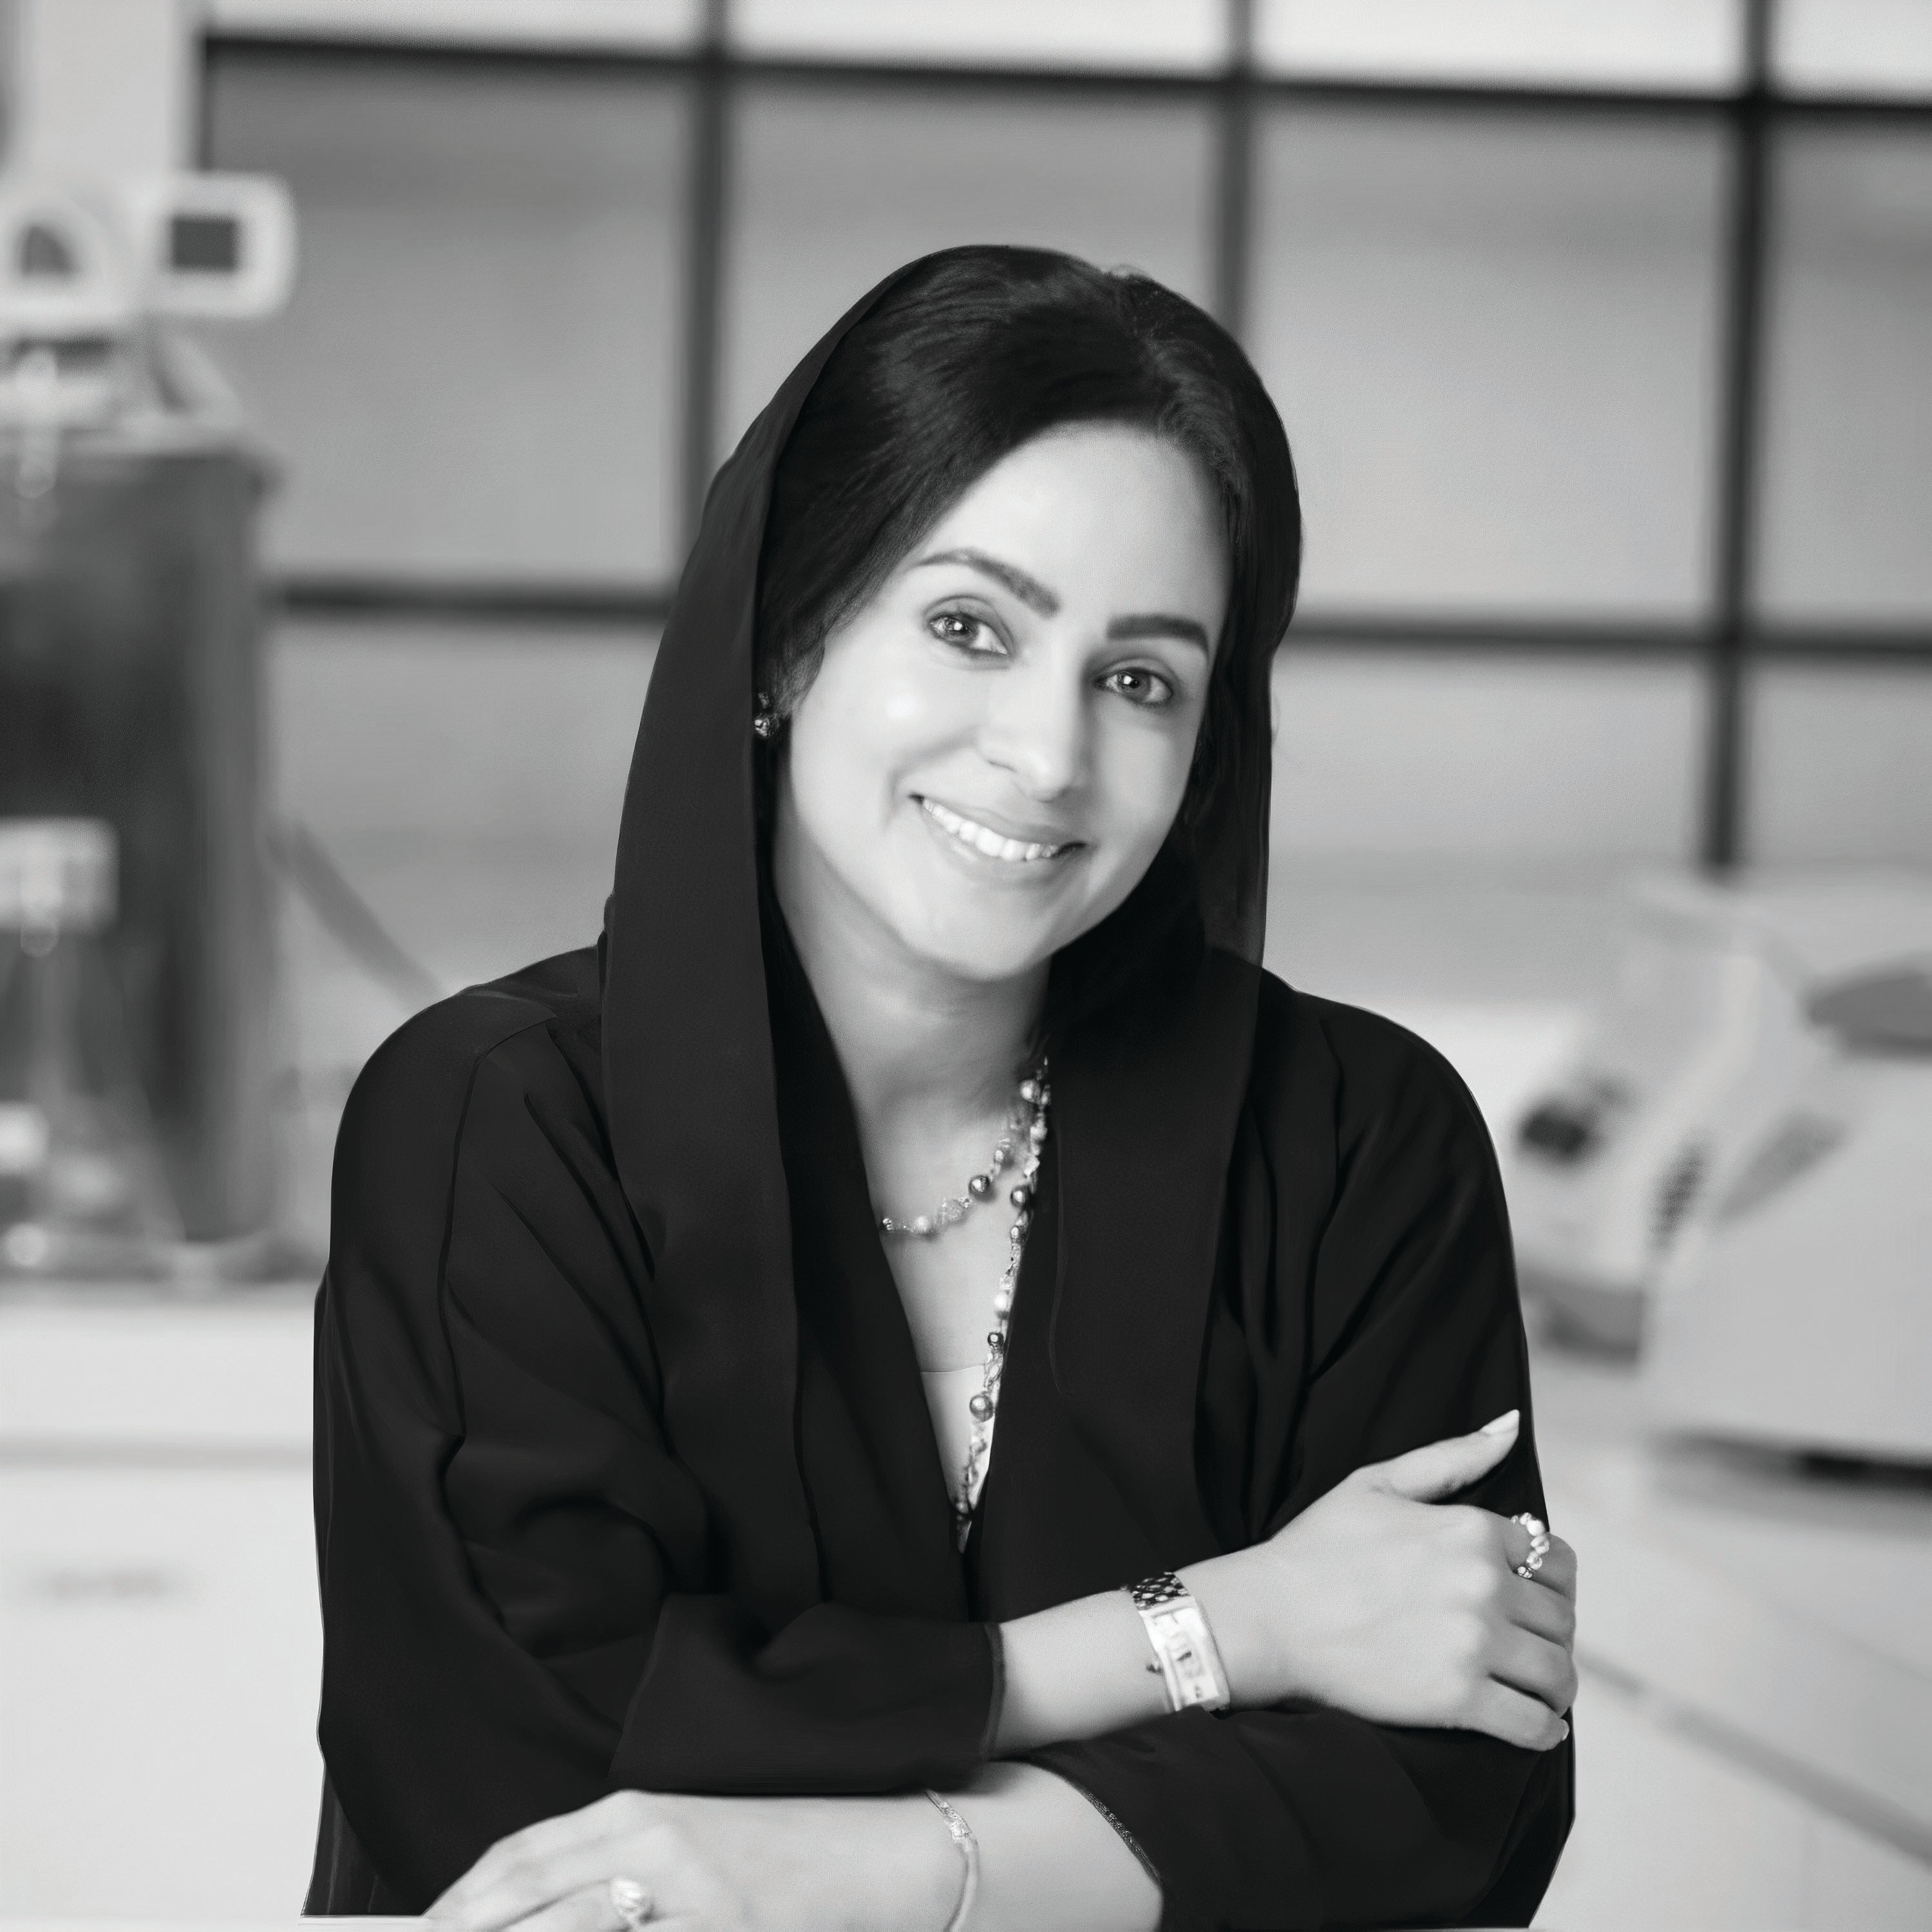 BW 2020 Official Photo of H E Dr Maryam-High resolution